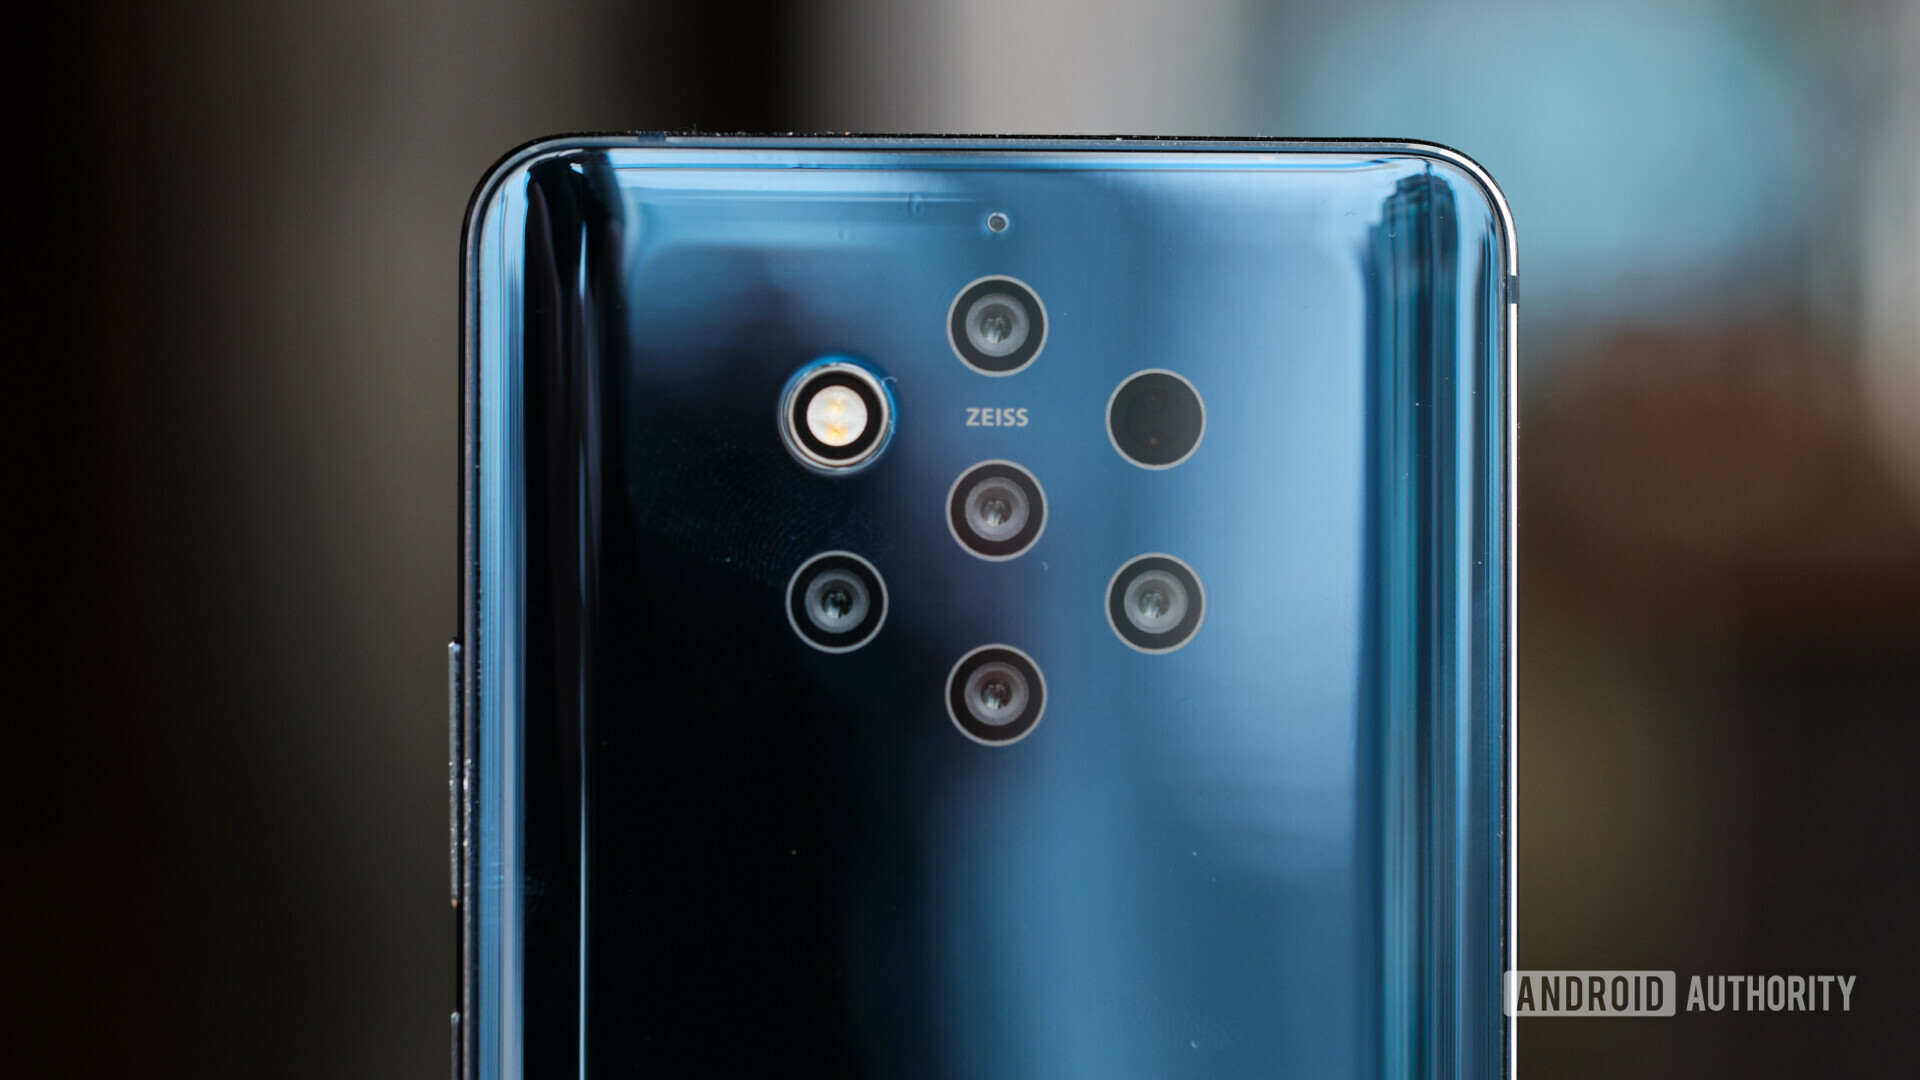 Backside of the Nokia 9 PureView focusing on the five cameras.